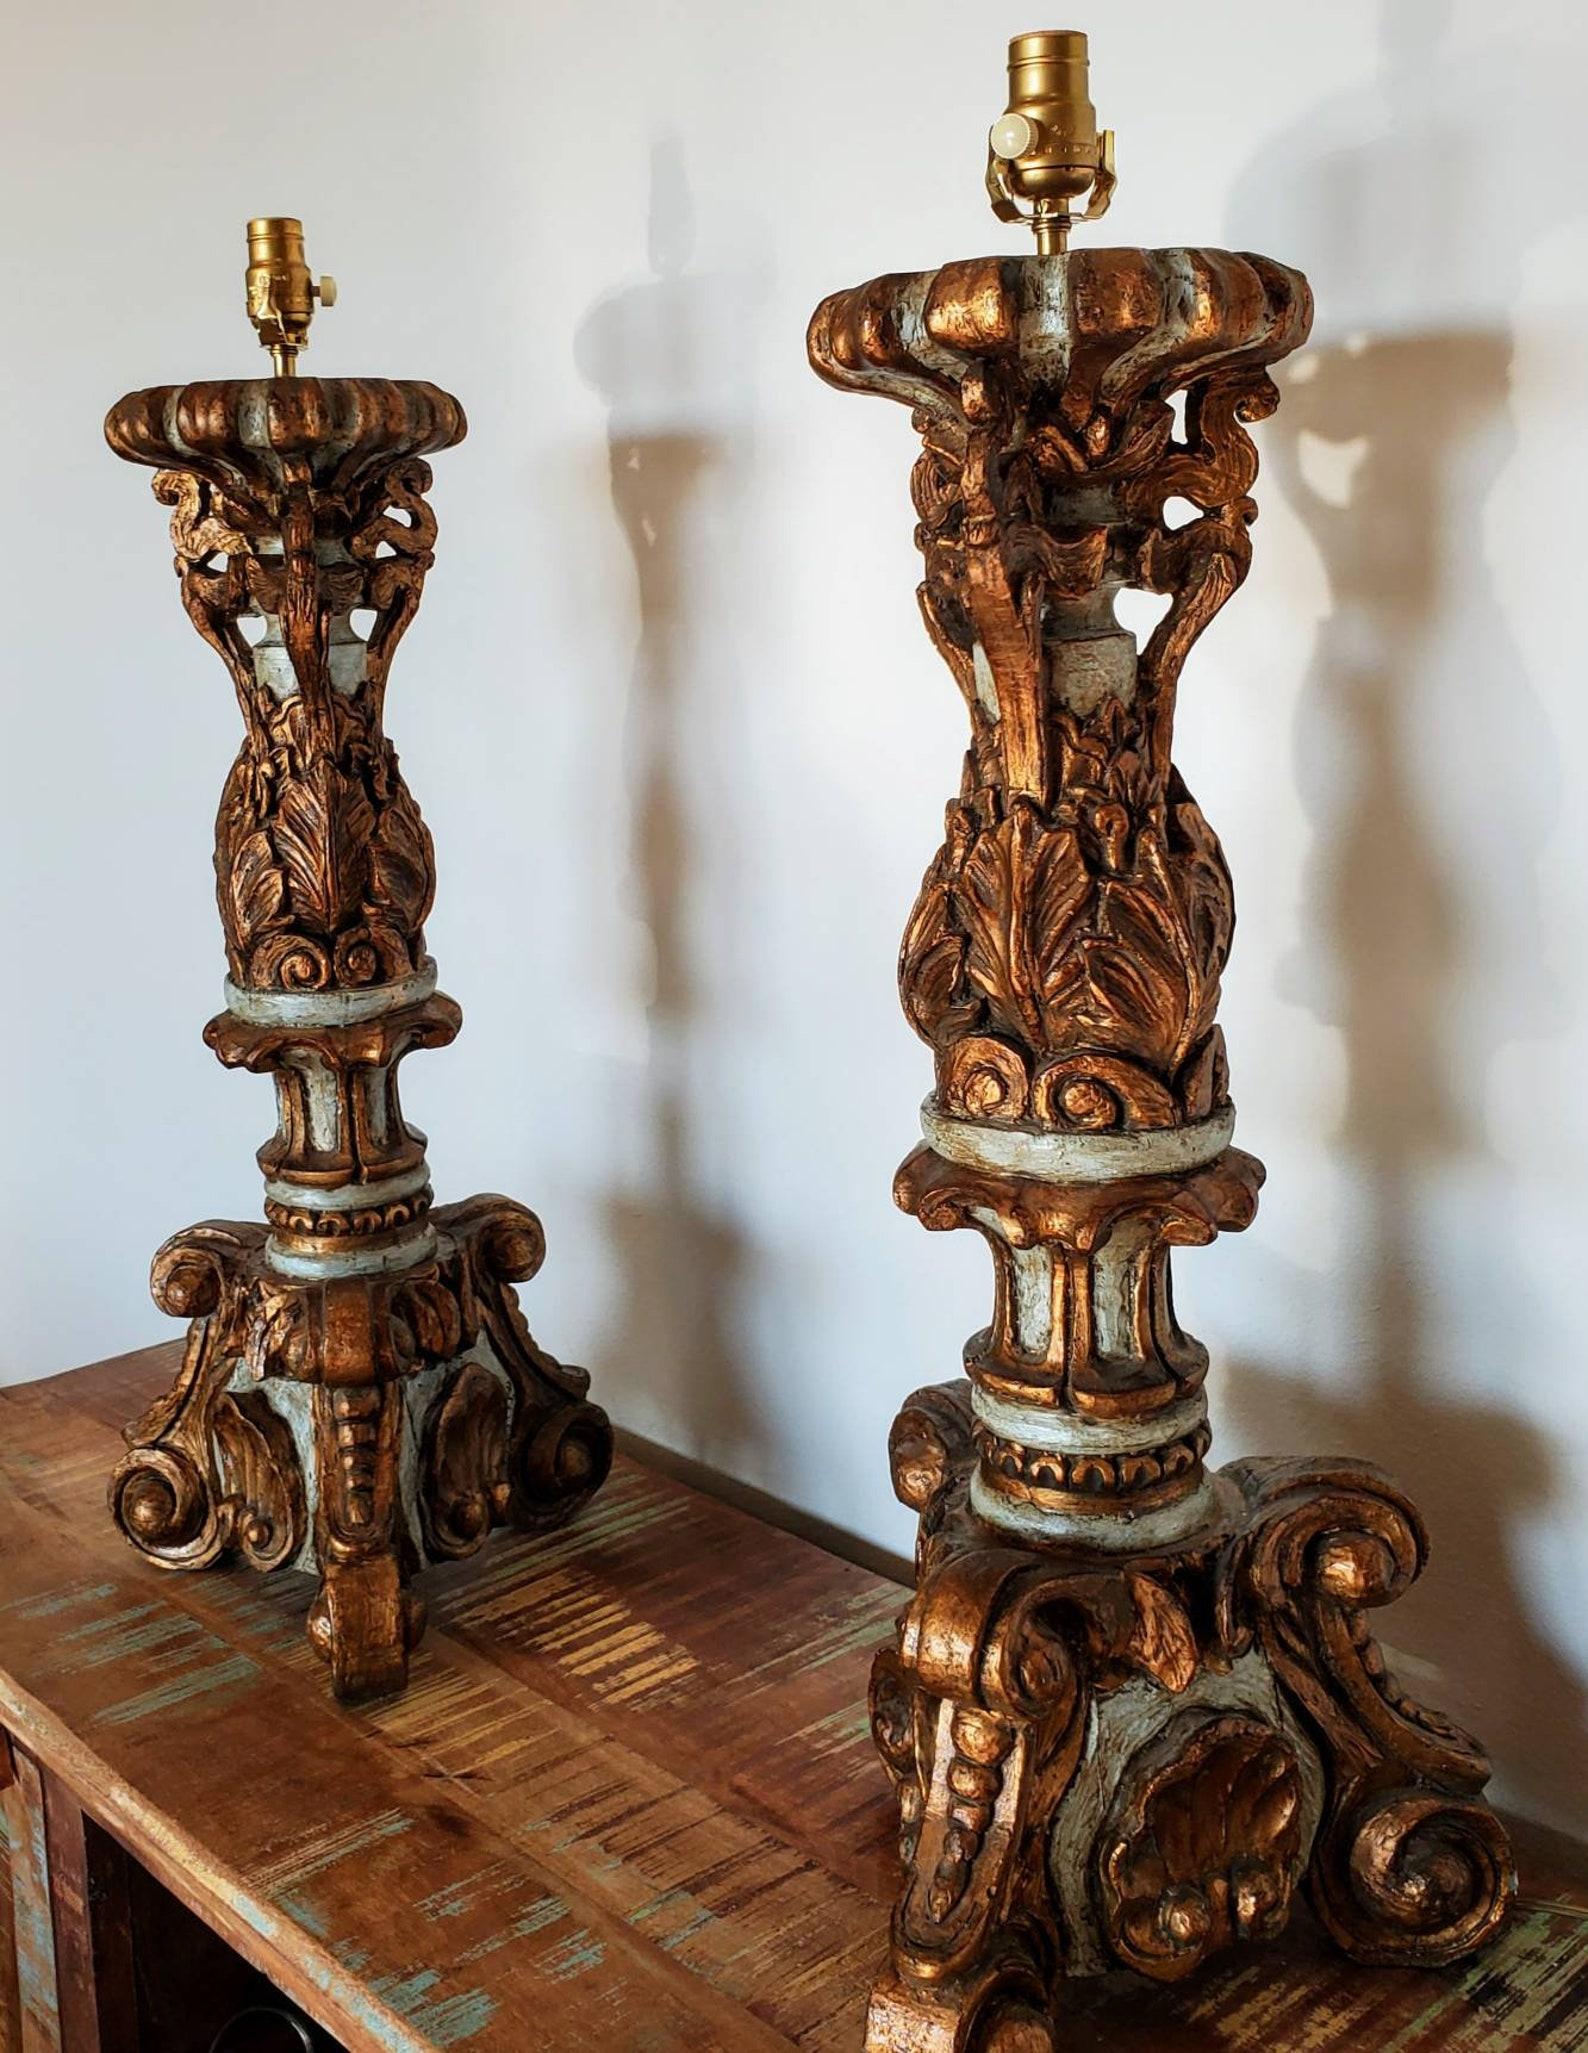 Pair of MAC Sculpture Italian Baroque Altar Candlestick Table Lamps In Good Condition For Sale In Forney, TX